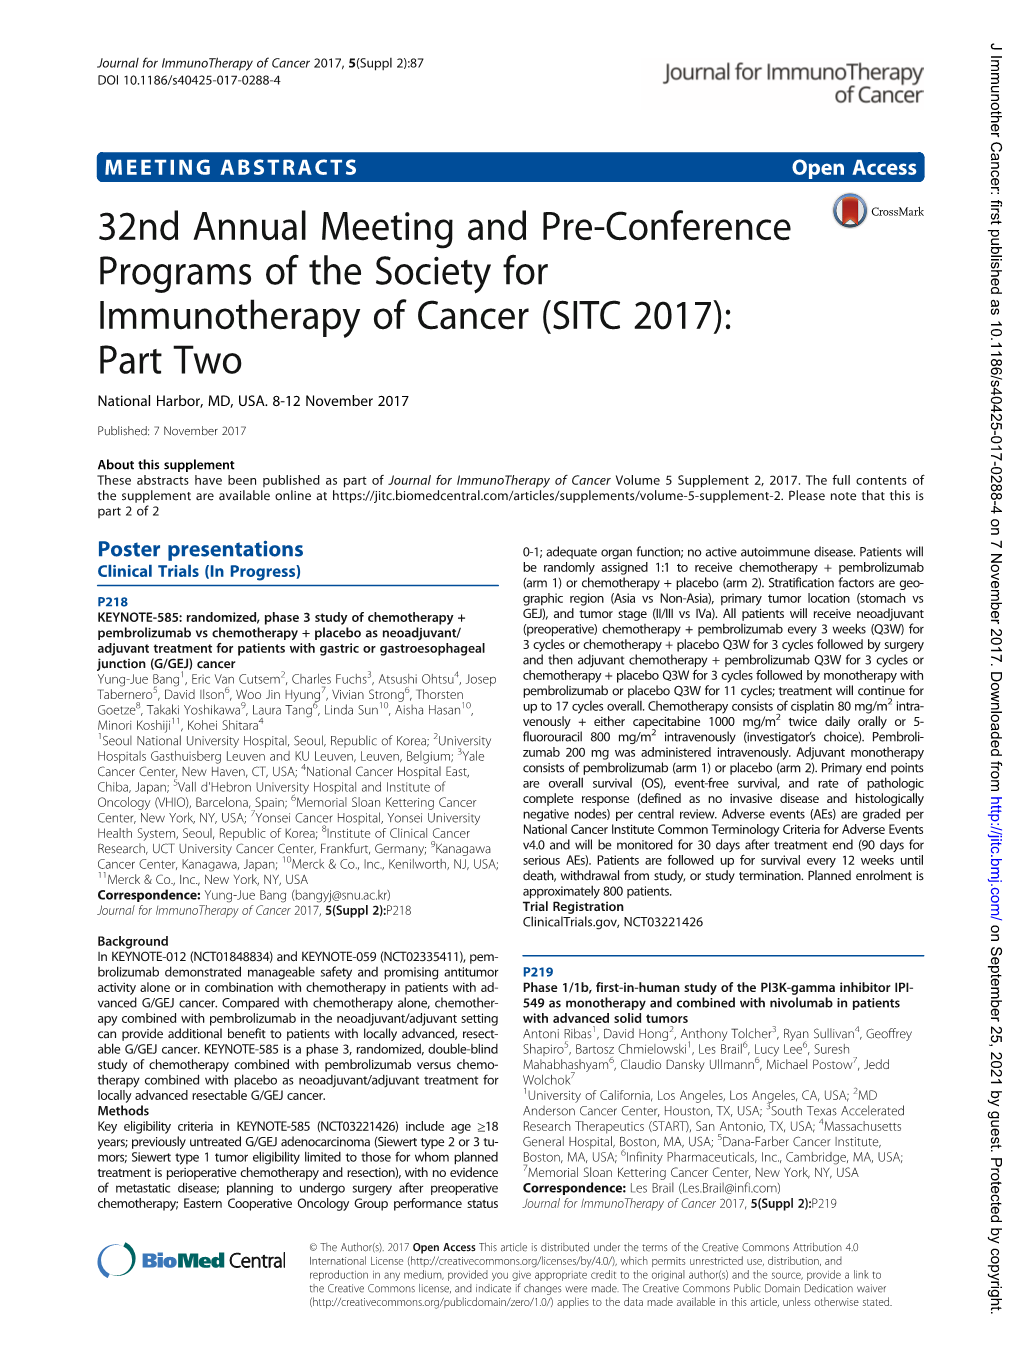 32Nd Annual Meeting and Pre-Conference Programs of the Society for Immunotherapy of Cancer (SITC 2017): Part Two National Harbor, MD, USA